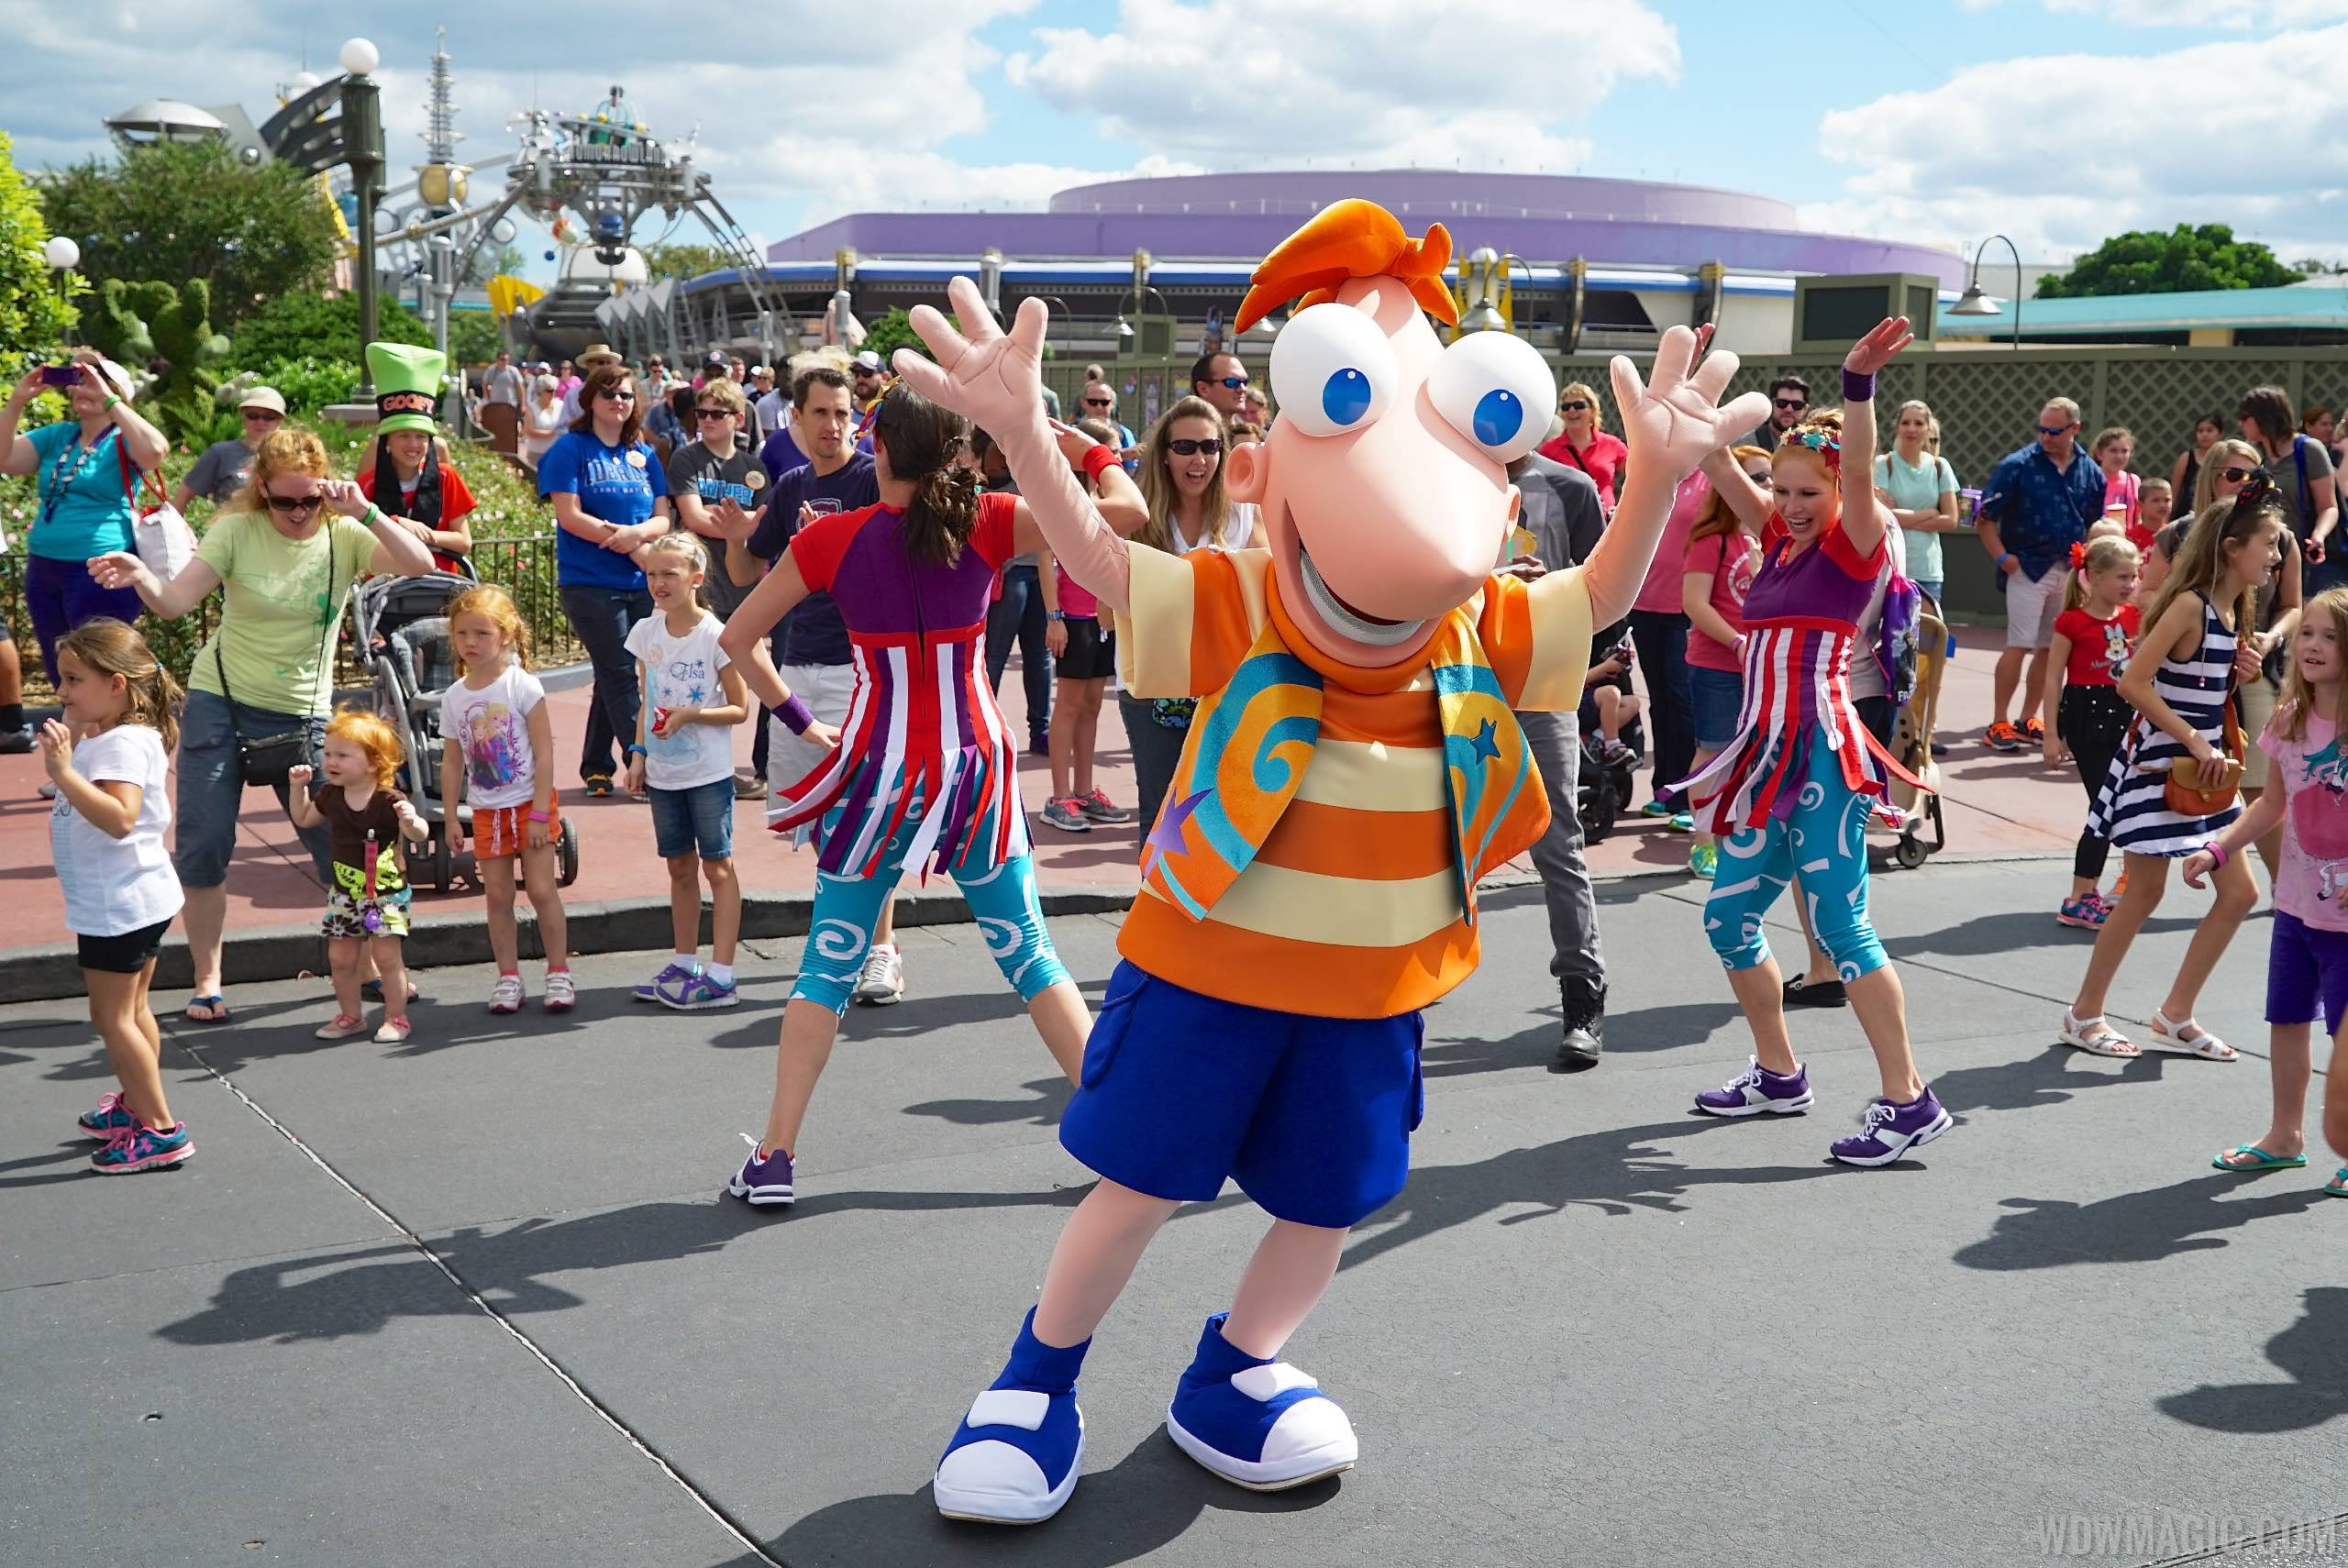 VIDEO - New 'Move It! Shake It! Dance and Play It!' Street Party opens at the Magic Kingdom